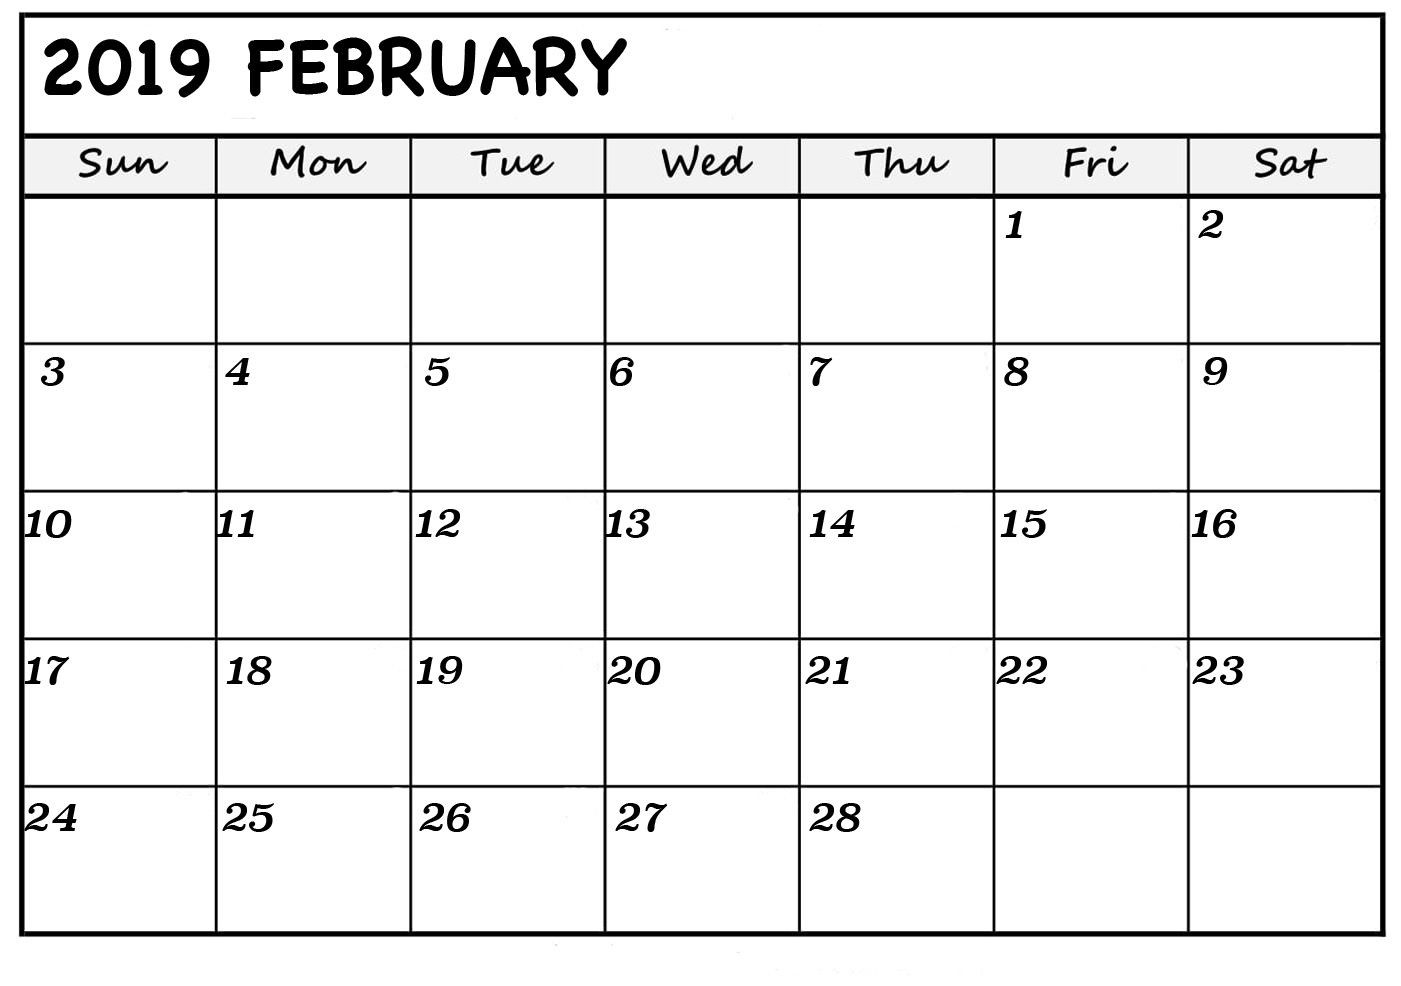 Download February 2019 Printable Calendar Pdf Excel Word-Free Printable Calendars With Cagtholic And Muslim Holidays